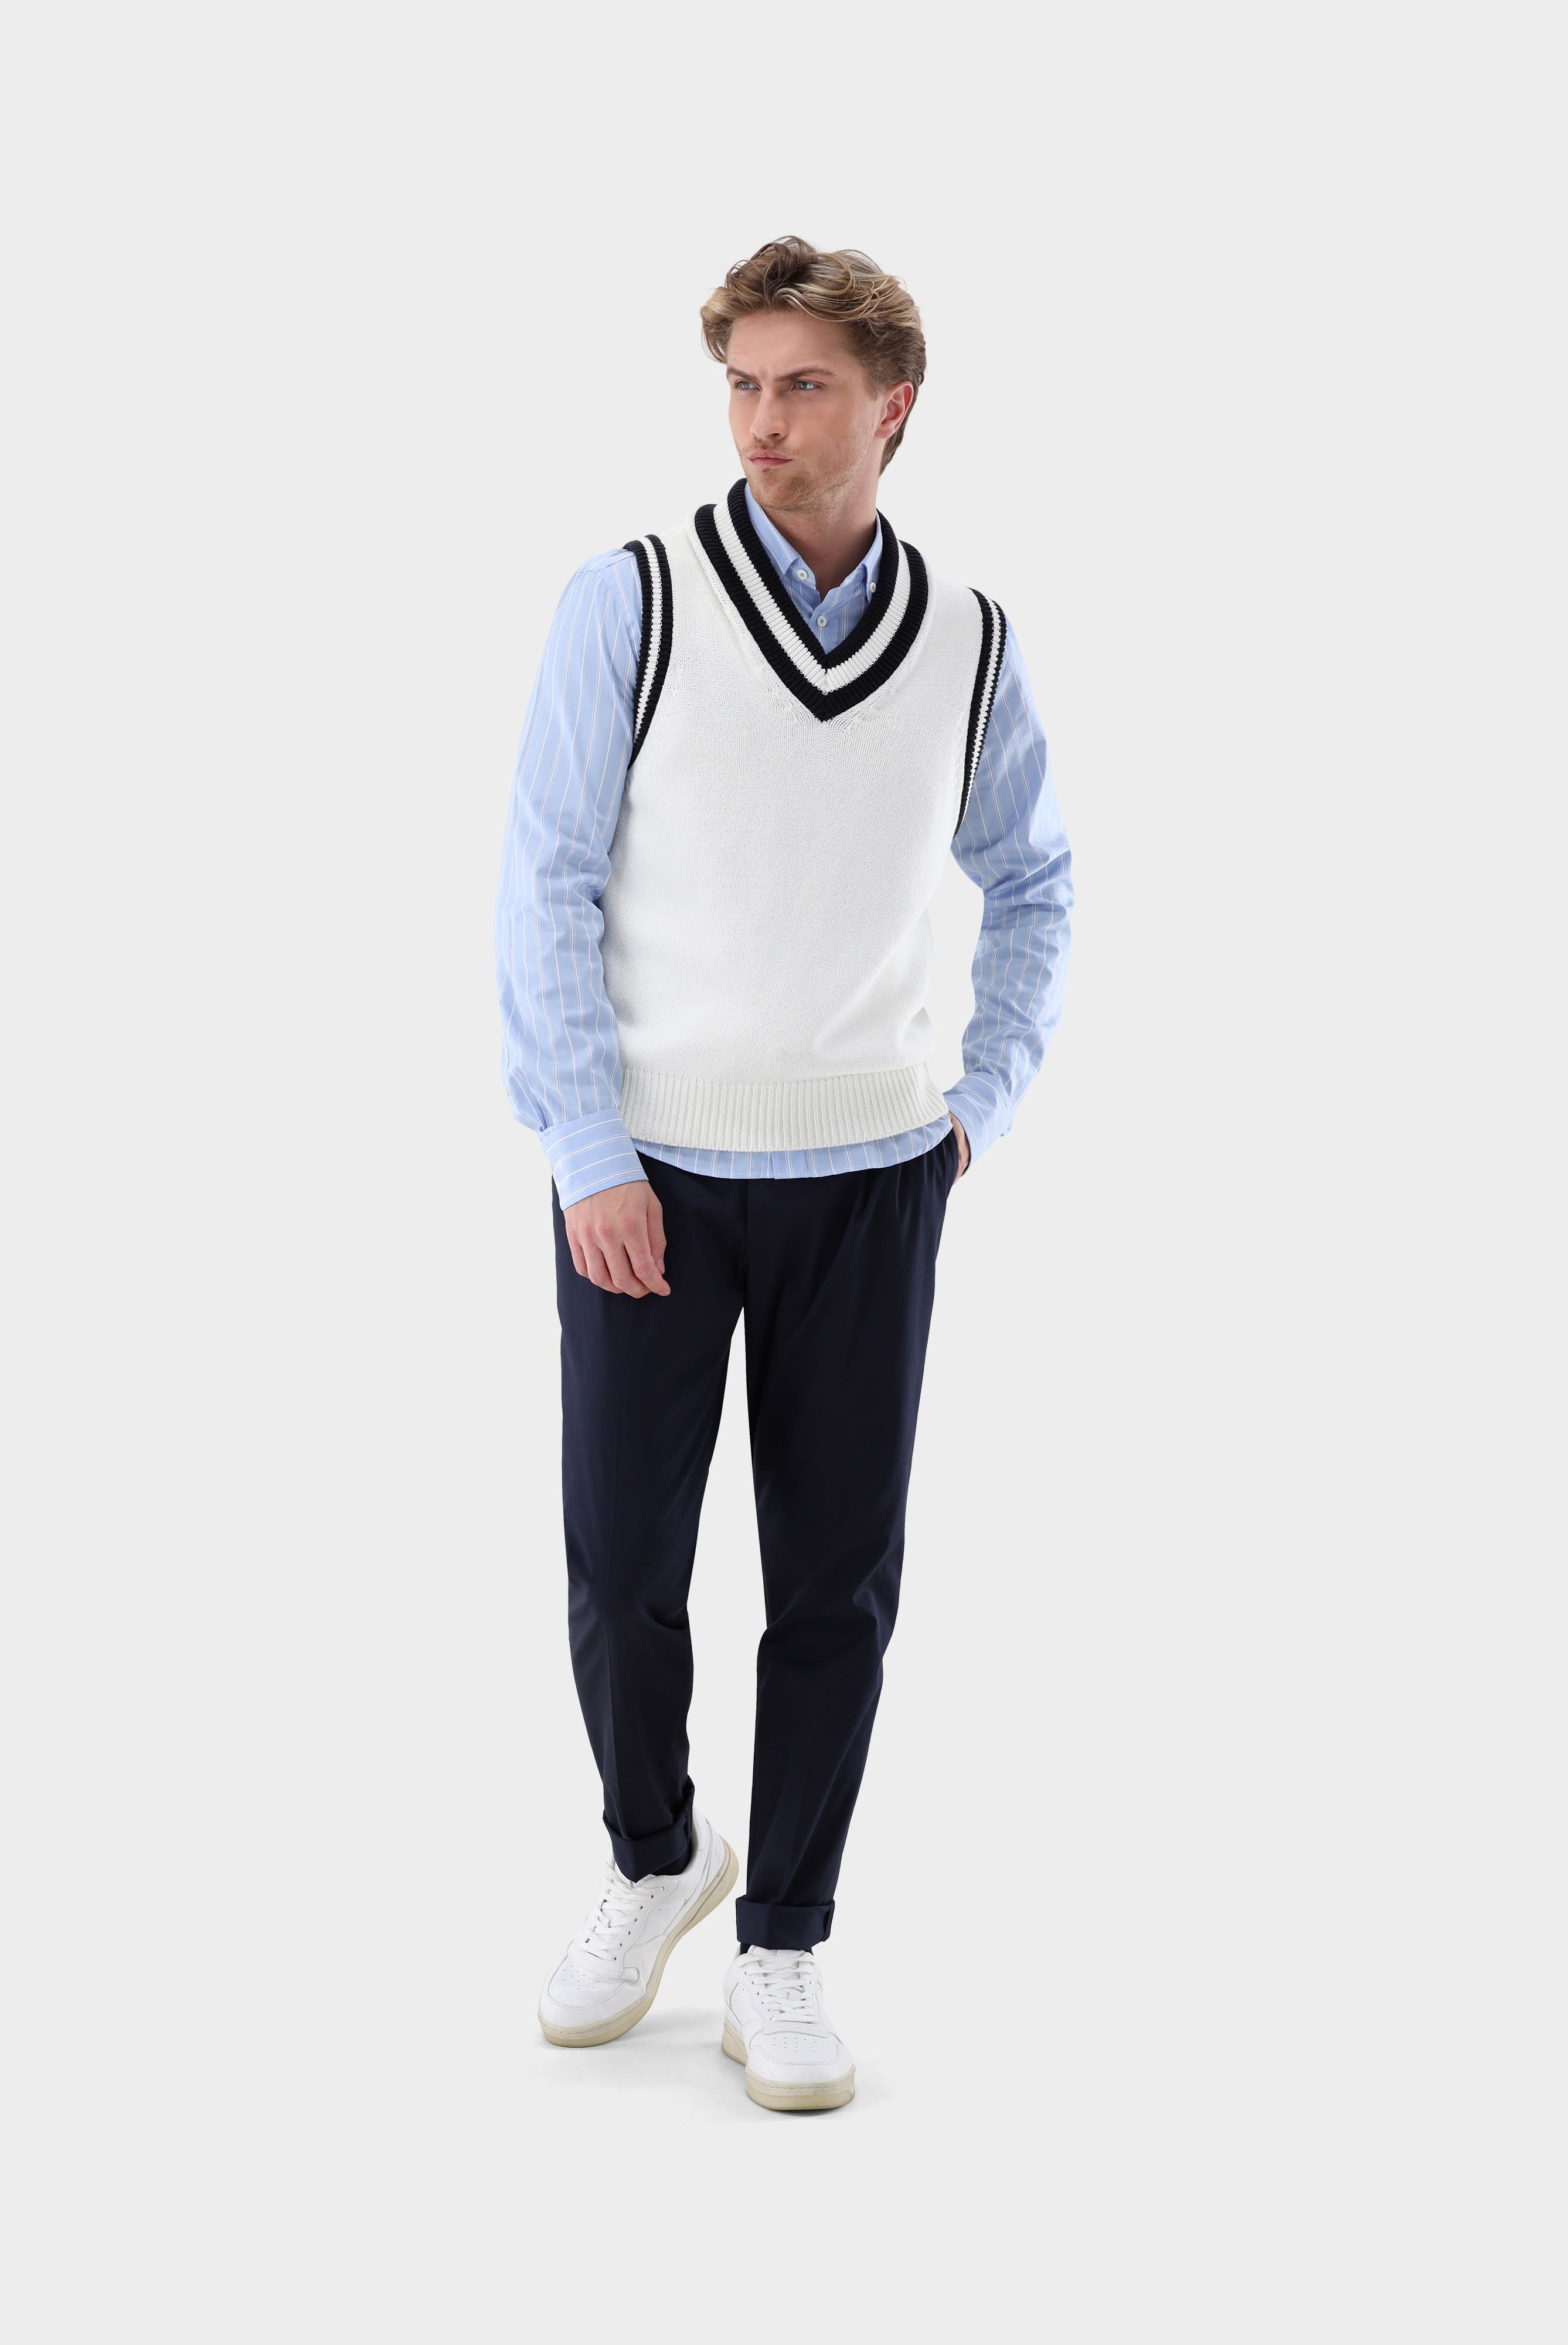 Sweaters & Cardigans+Retro Tennis Sweater Vest Made of Cotton+82.8641.S7.S00262.100.S